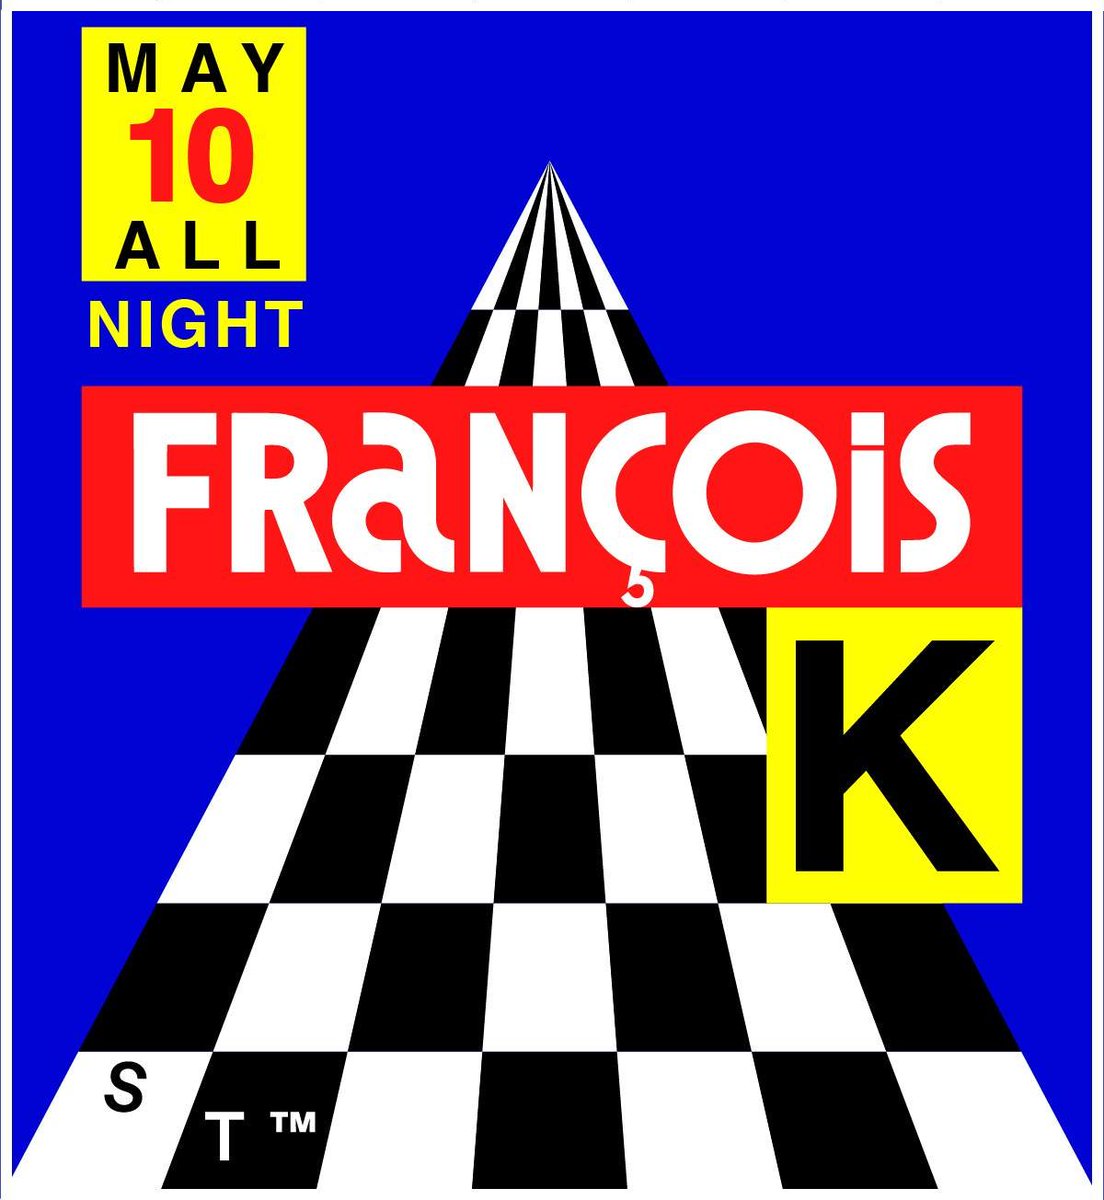 Hey Ontario residents, I'm excited to share that I'll be playing a start-to-finish set this Friday May 10 at @ Standard Time 165 Geary Ave Toronto, ON M6H 2B8
Tickets are going fast! ra.co/events/1888400
#francoisk #allnightlong #musicismylife #toronto #eclectic #djset